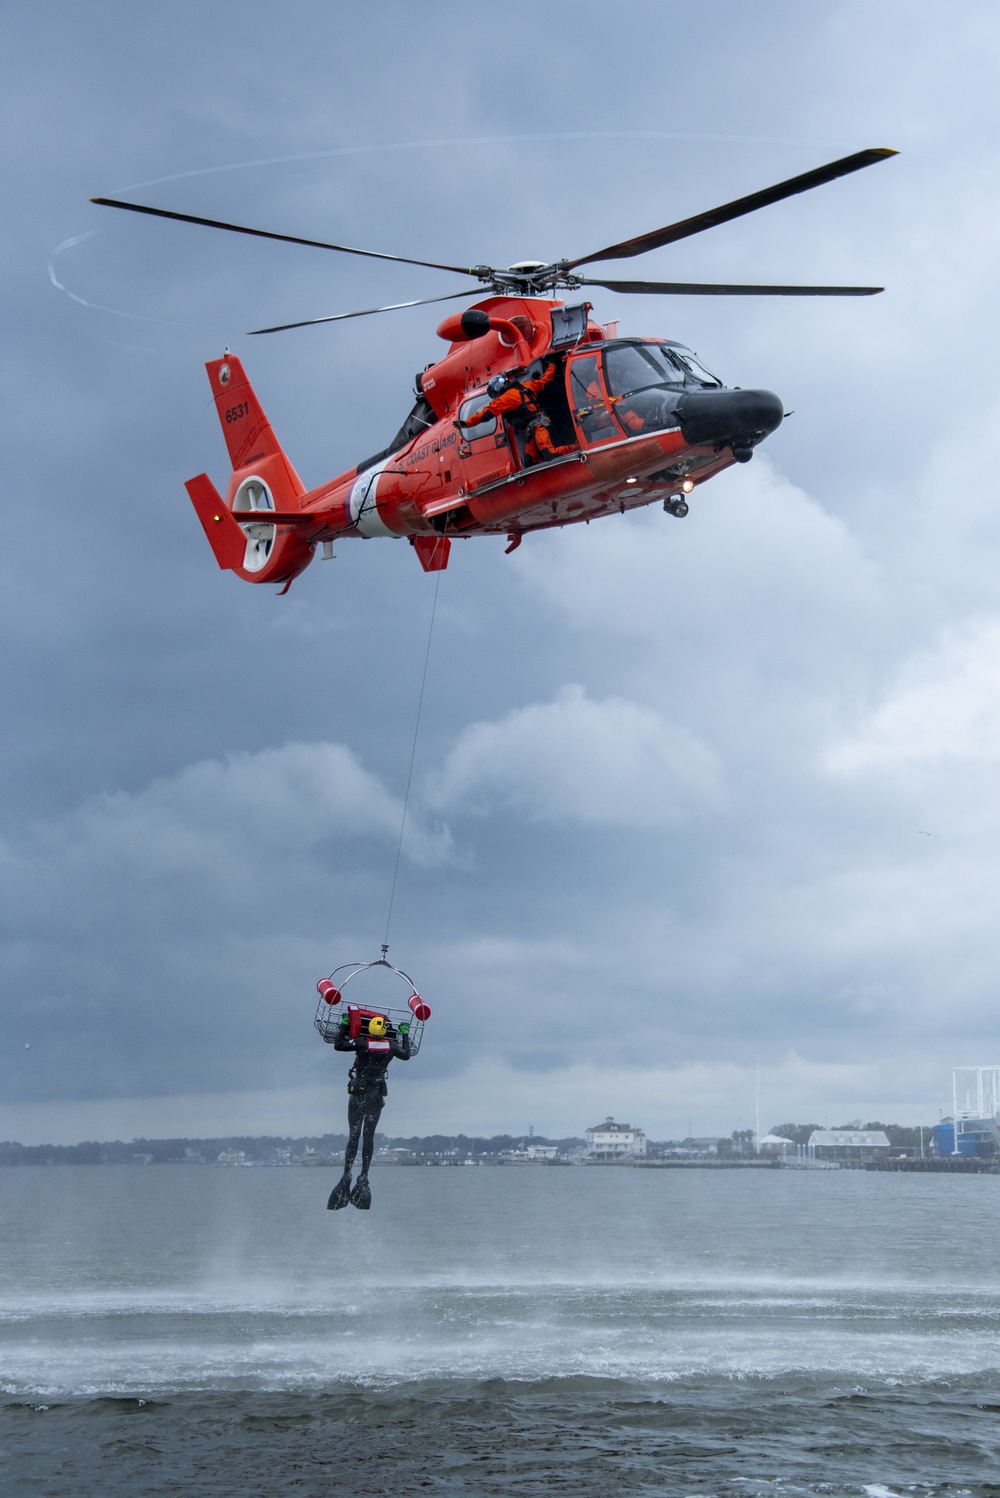 DVIDS - Images - Coast Guard Air Station Savannah conducts search and ...